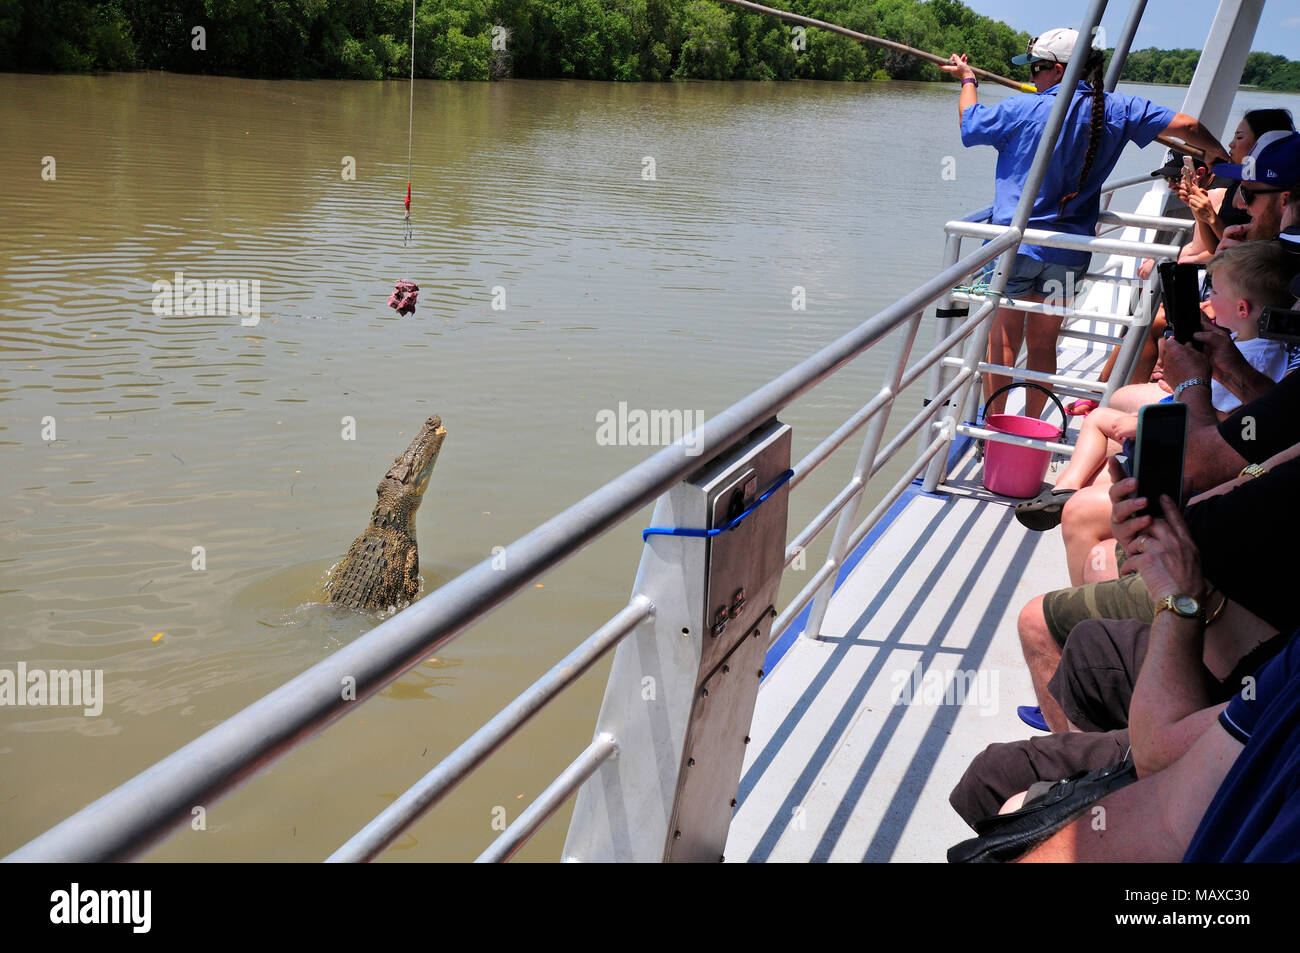 https://c8.alamy.com/comp/MAXC30/crocodile-jumping-for-buffalo-meat-taken-while-on-a-jumping-crocodile-cruise-adelaide-river-nr-darwin-top-end-northern-territory-australia-MAXC30.jpg